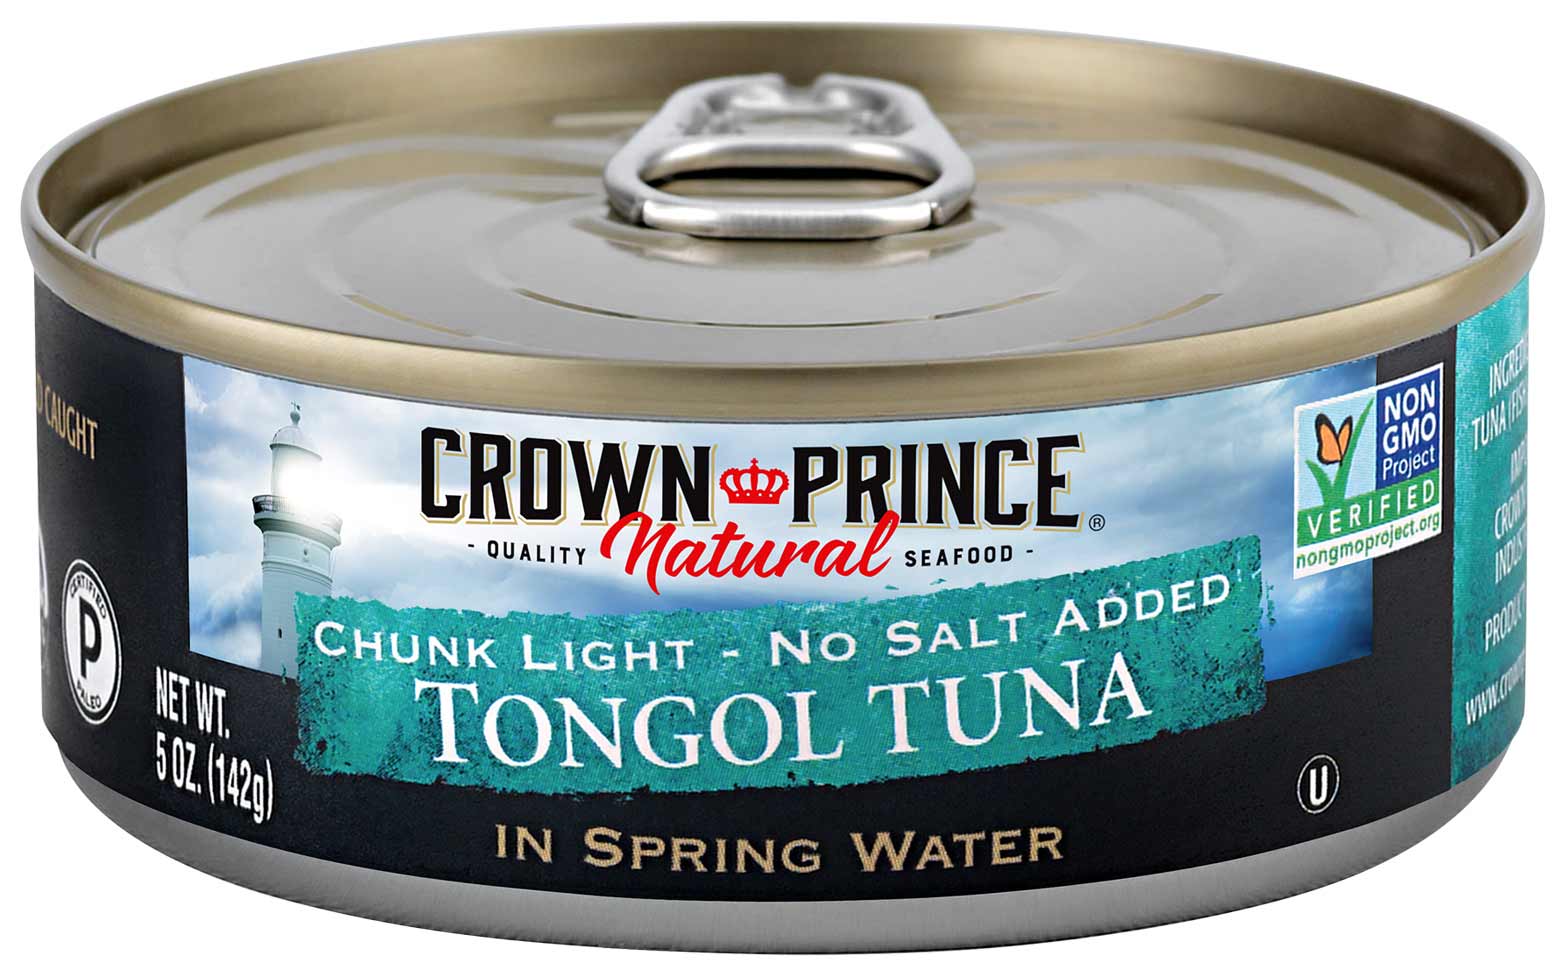 Crown Prince Natural Chunk Light Tongol Tuna in Spring Water - No Salt Added